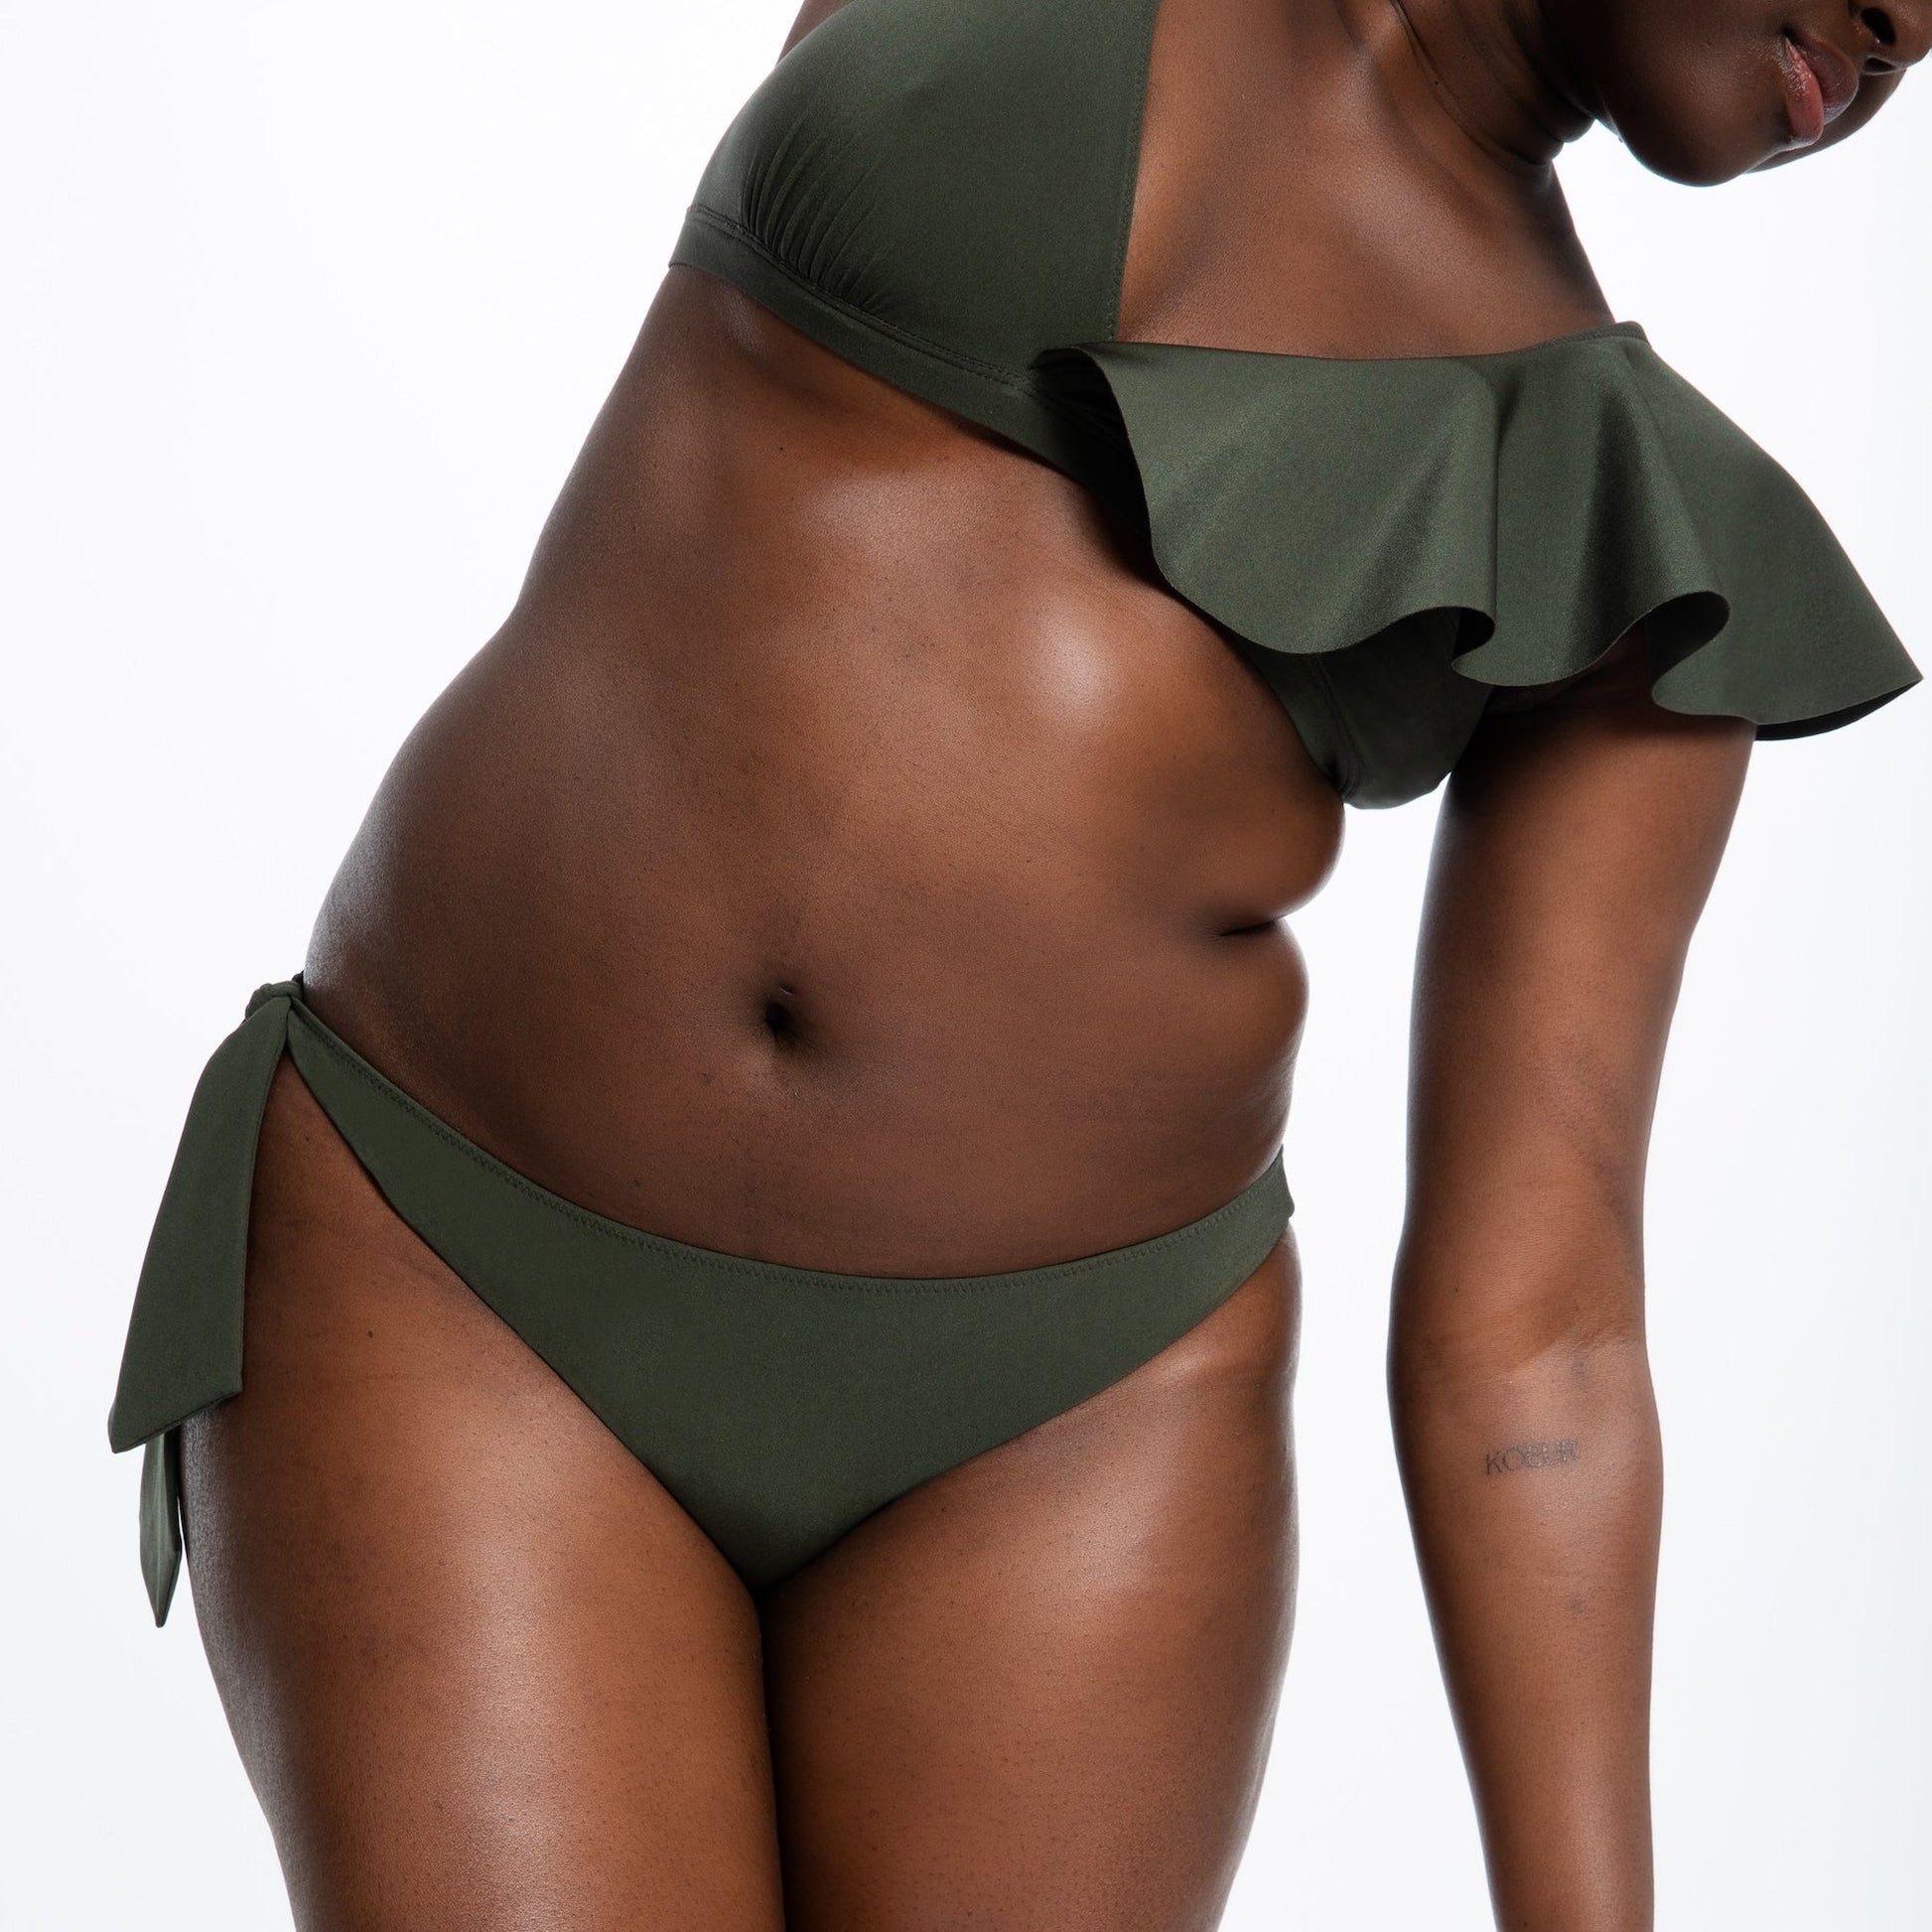 Picture Me Better Bikini Top is post-unilateral mastectomy bikini that perfectly fits people with one breast. By Eno.Eco | Offering stylish, sustainable alternatives after a single mastectomy | The Bra Sisters